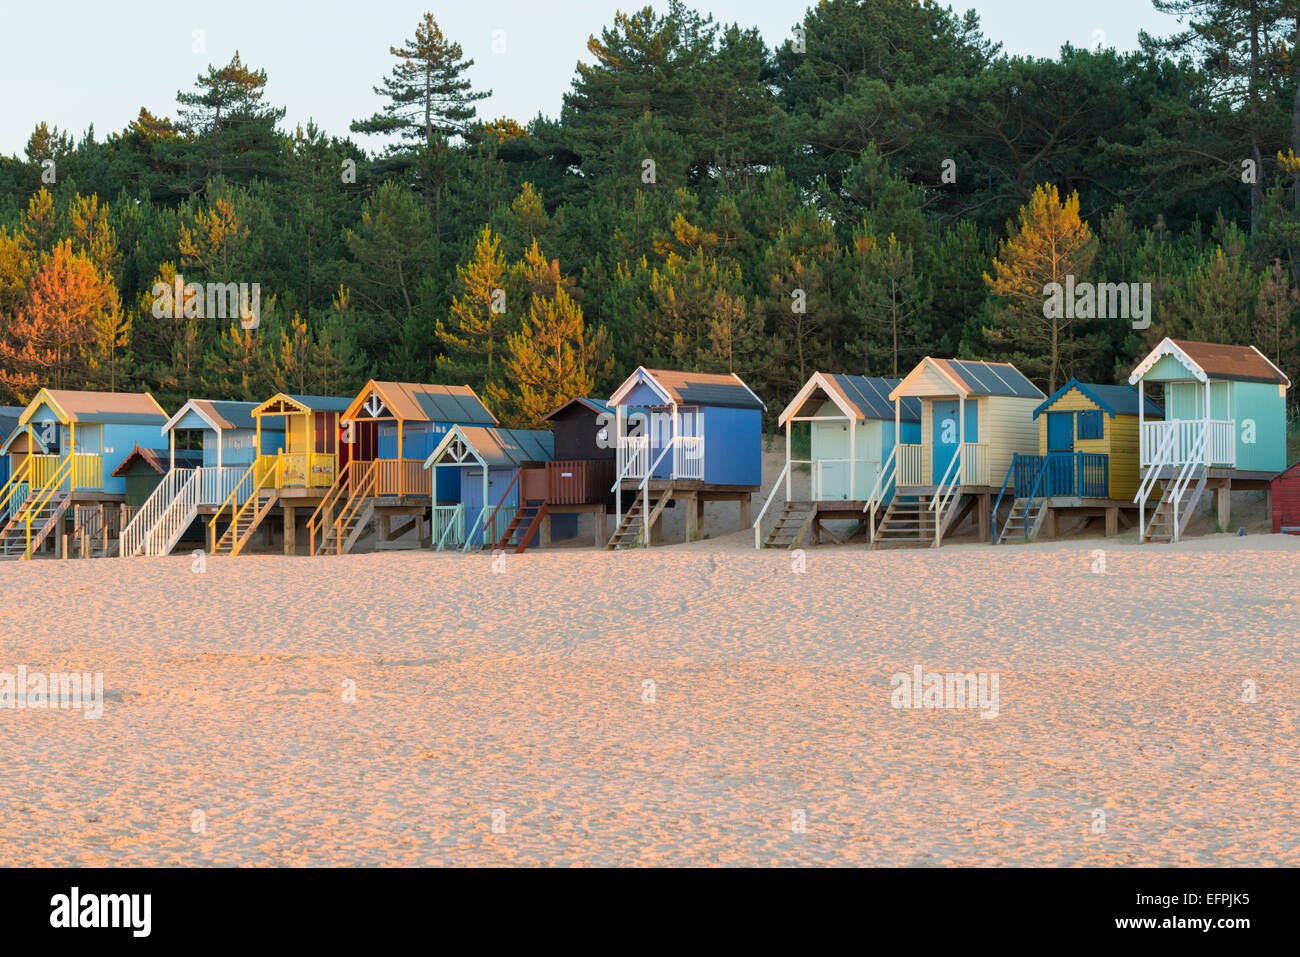 A view of Beach Huts at Wells next the Sea, Norfolk, England, United Kingdom, Europe Stock Photo